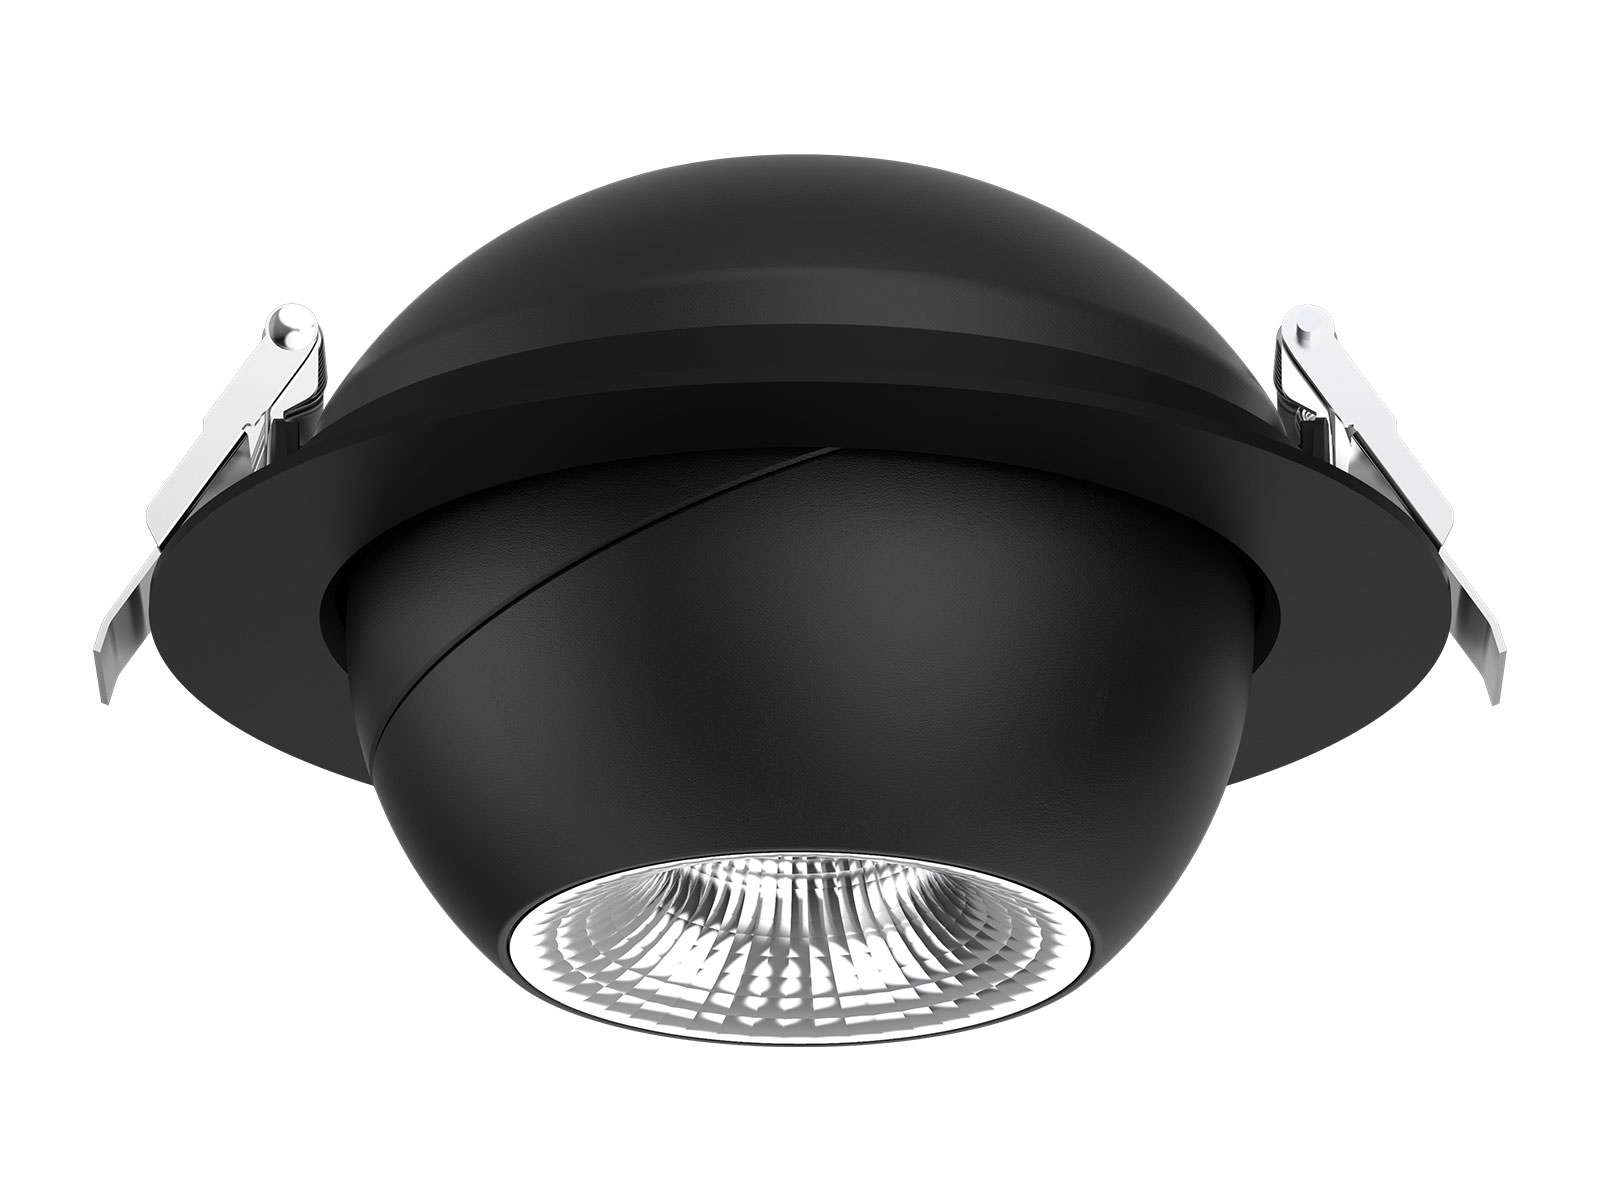 DL322 LED Downlight 340 degree rotatory and 40 degree adjustable